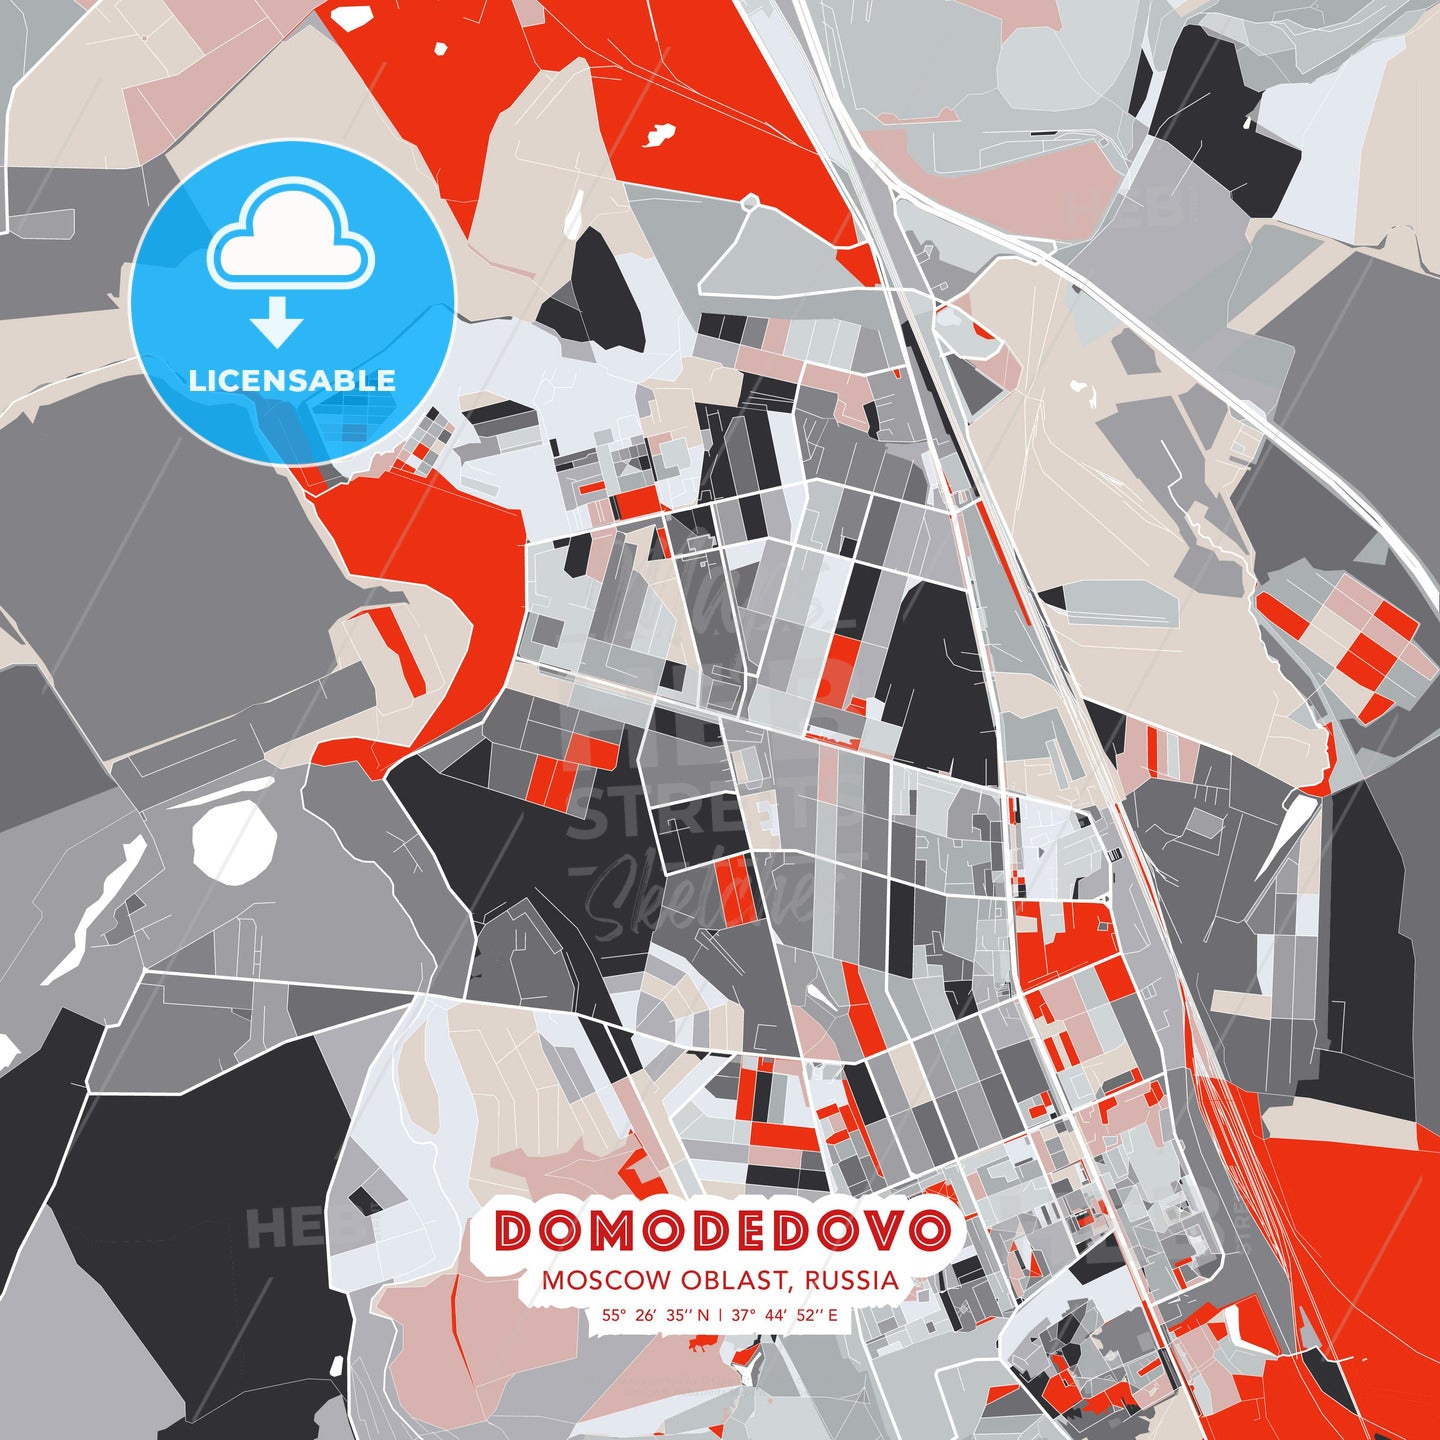 Domodedovo, Moscow Oblast, Russia, modern map - HEBSTREITS Sketches